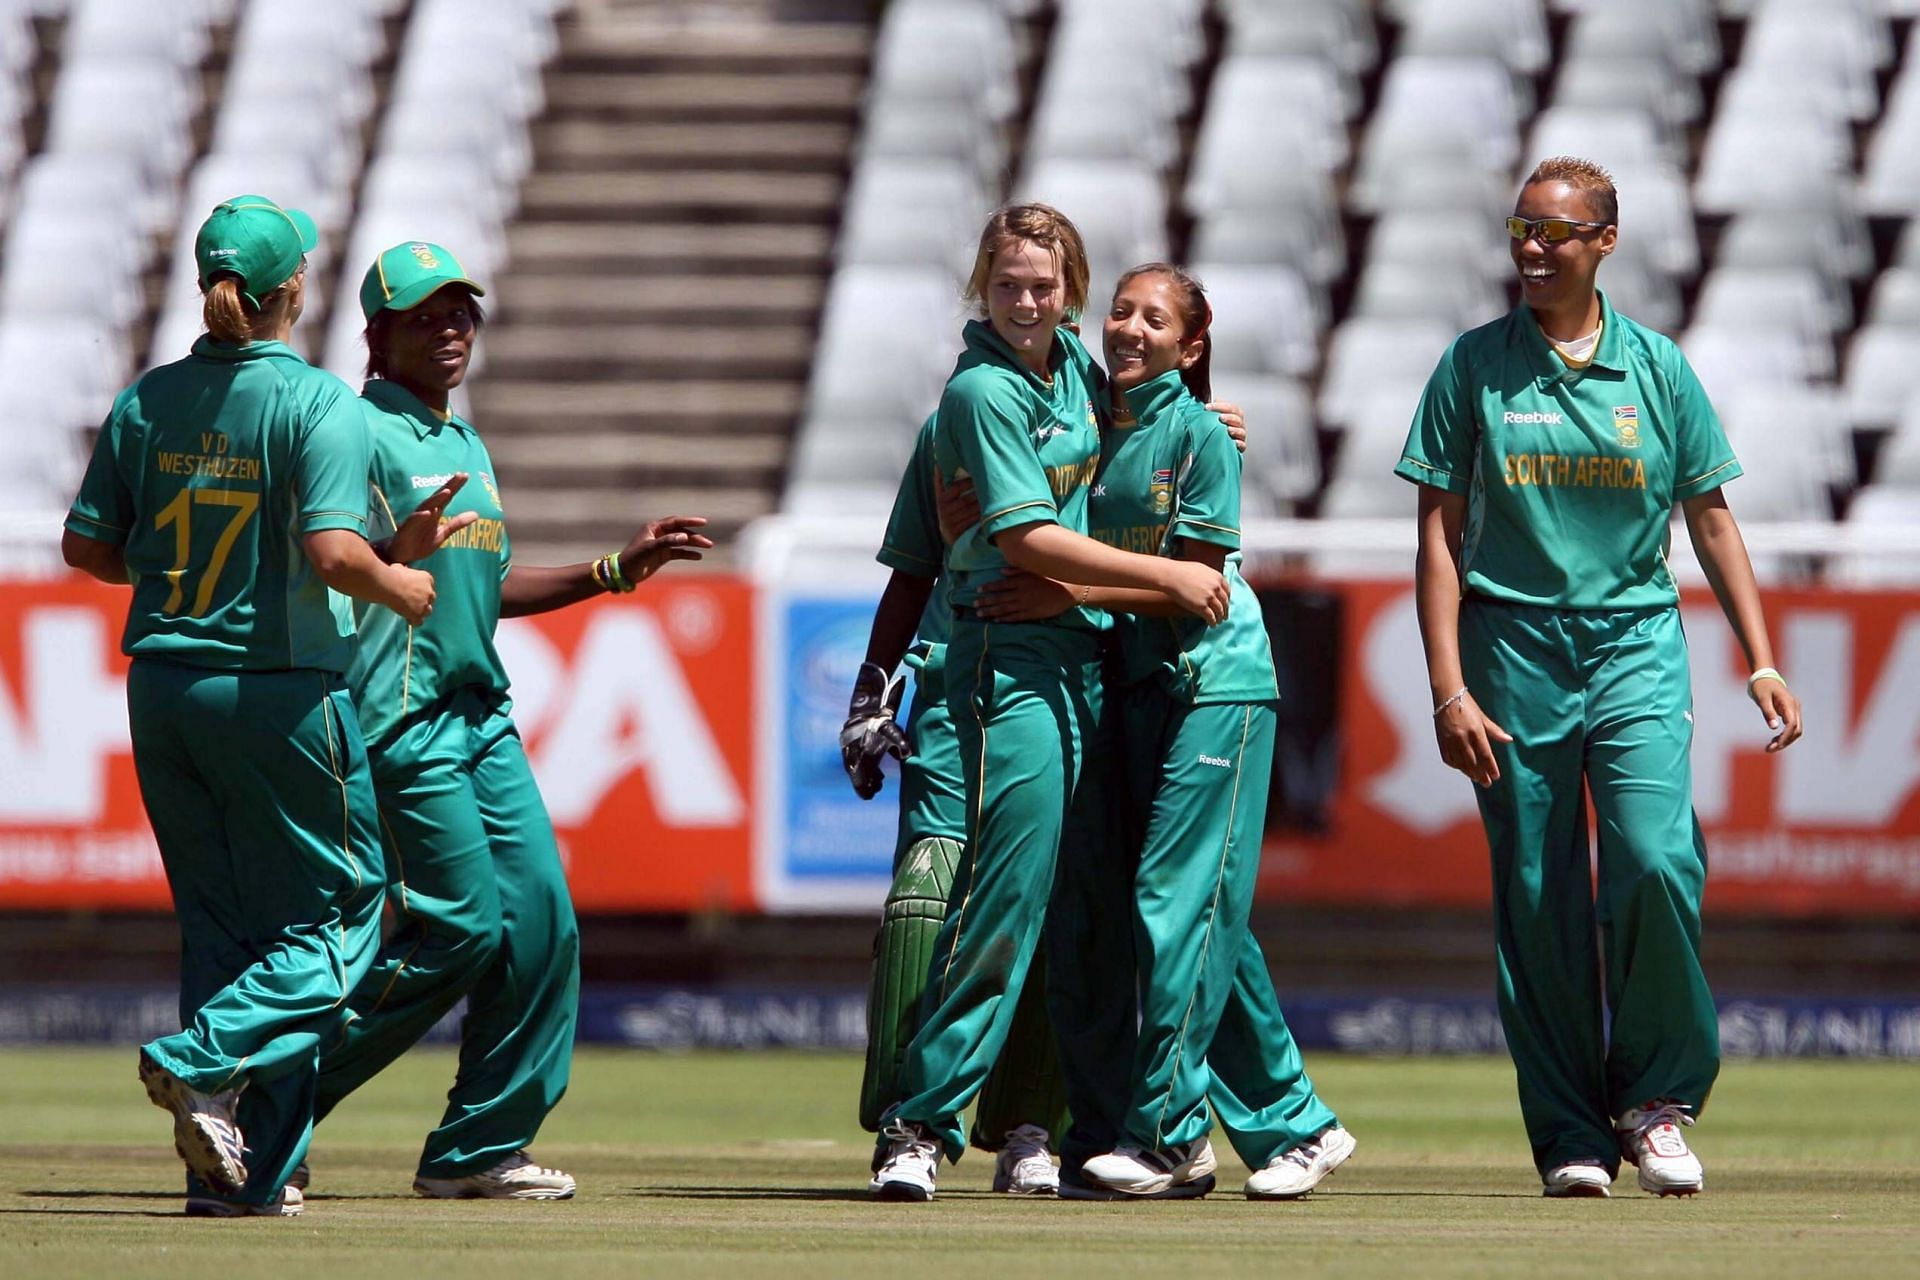 The South African pacer celebrates a wicket with teammates. (Pic: Getty Images)